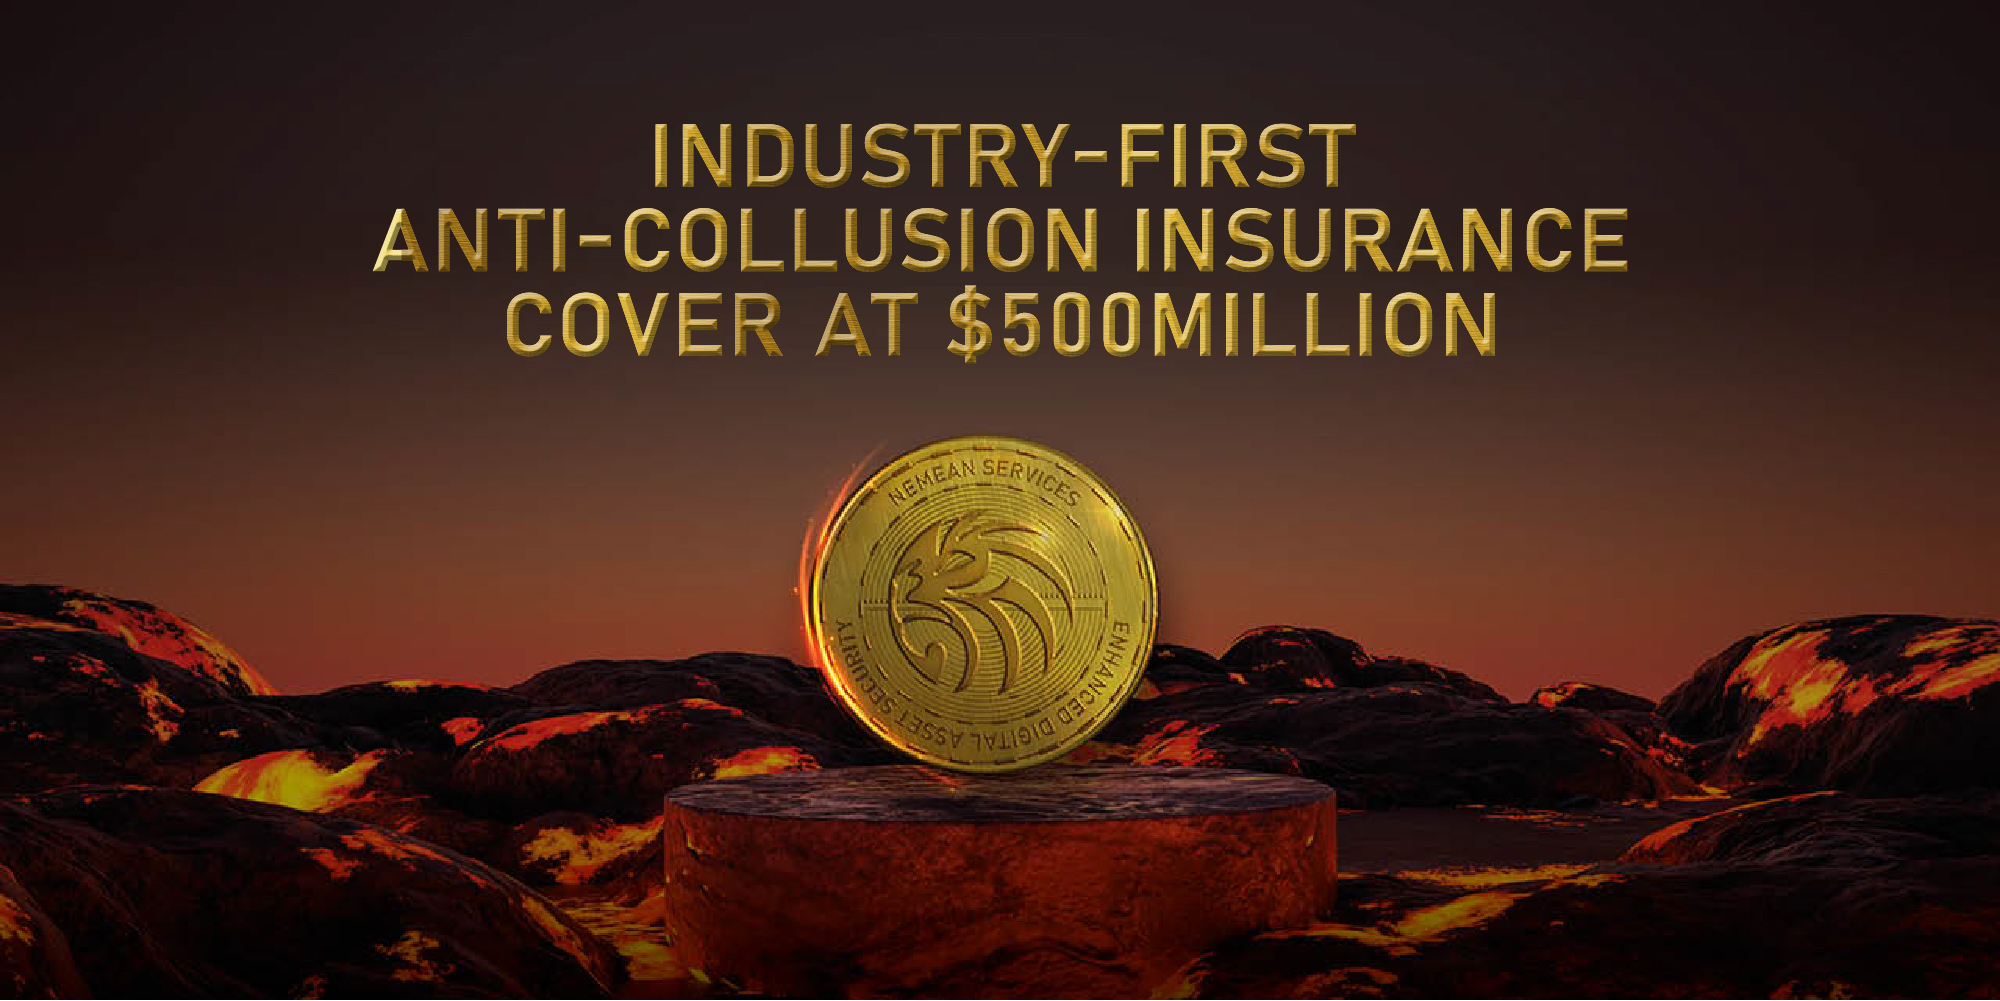 Insurance Update: Anti-Collusion Insurance Cover At $500 Million Dollars